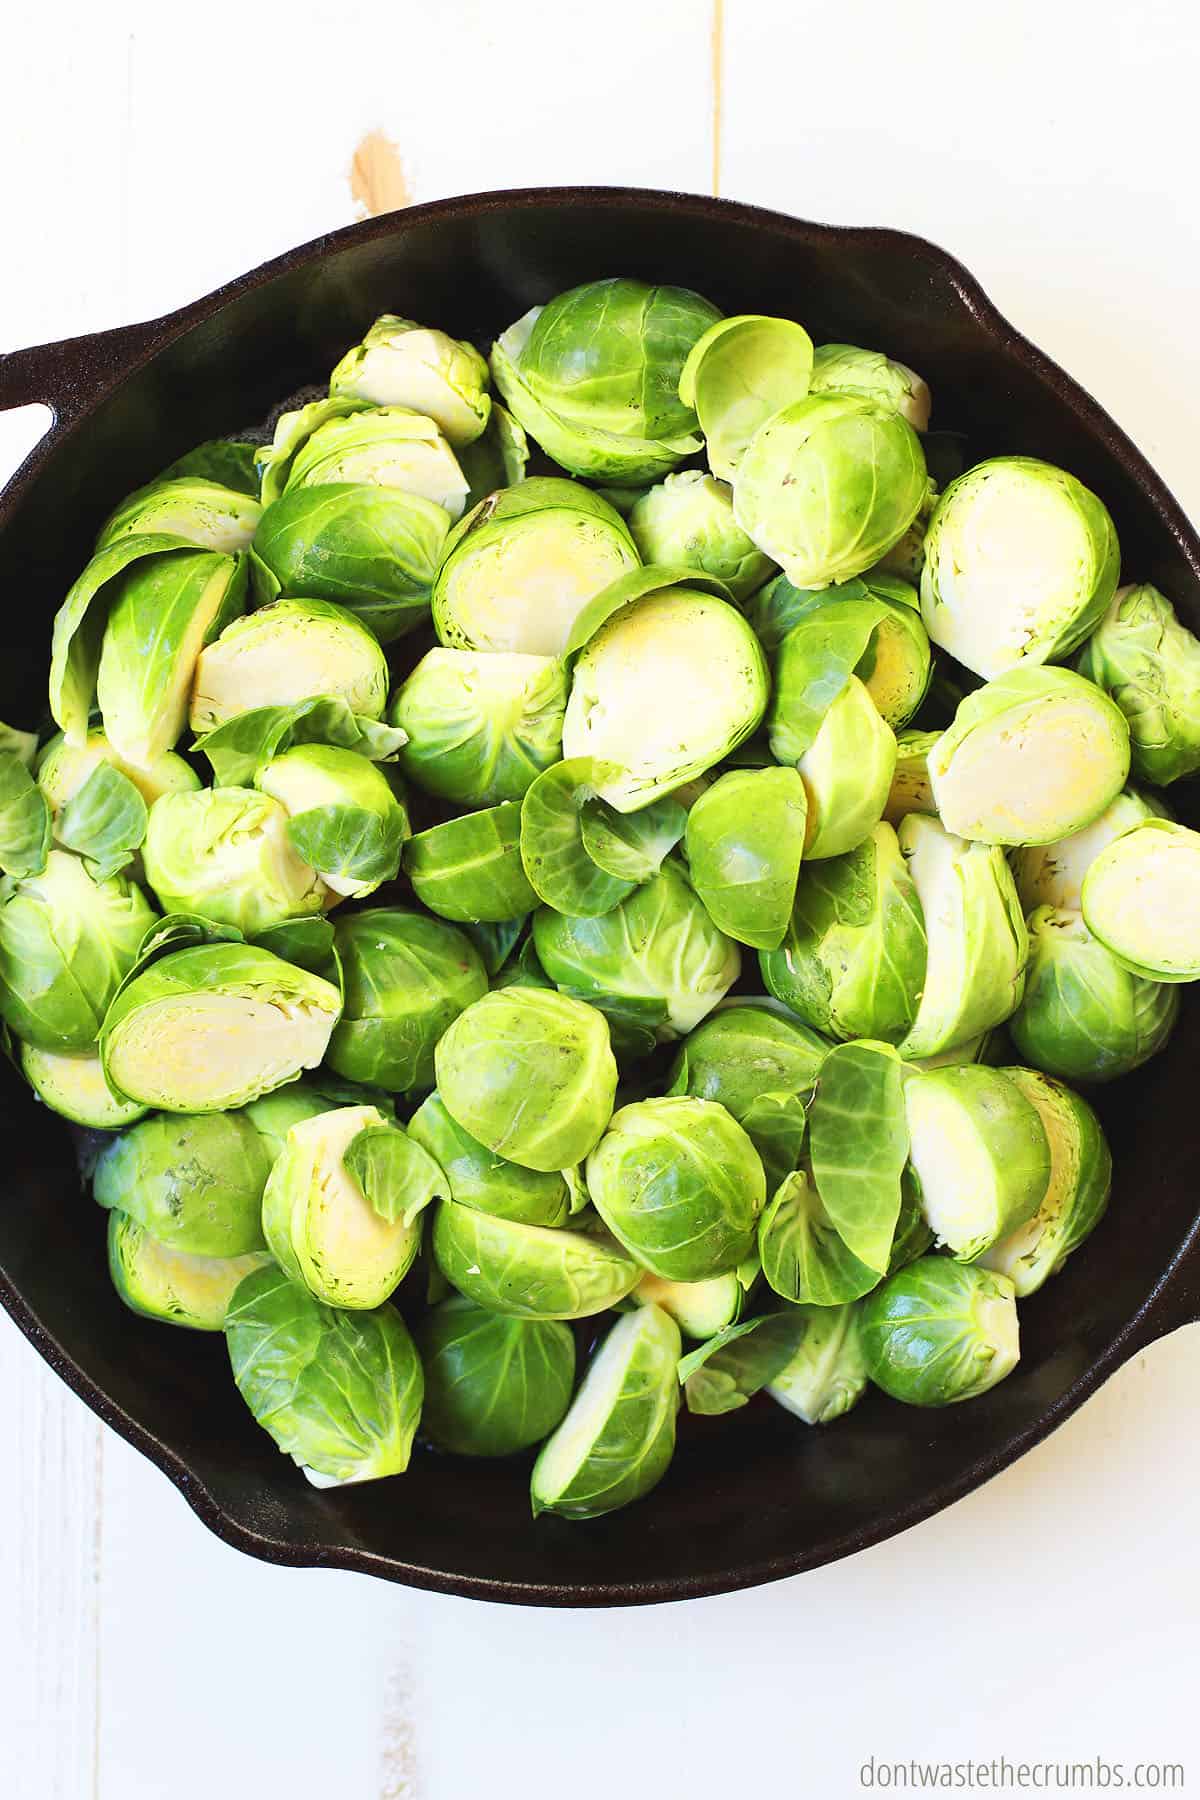 Freshly washed and sliced raw Brussels Sprouts are placed into a cast iron skillet.